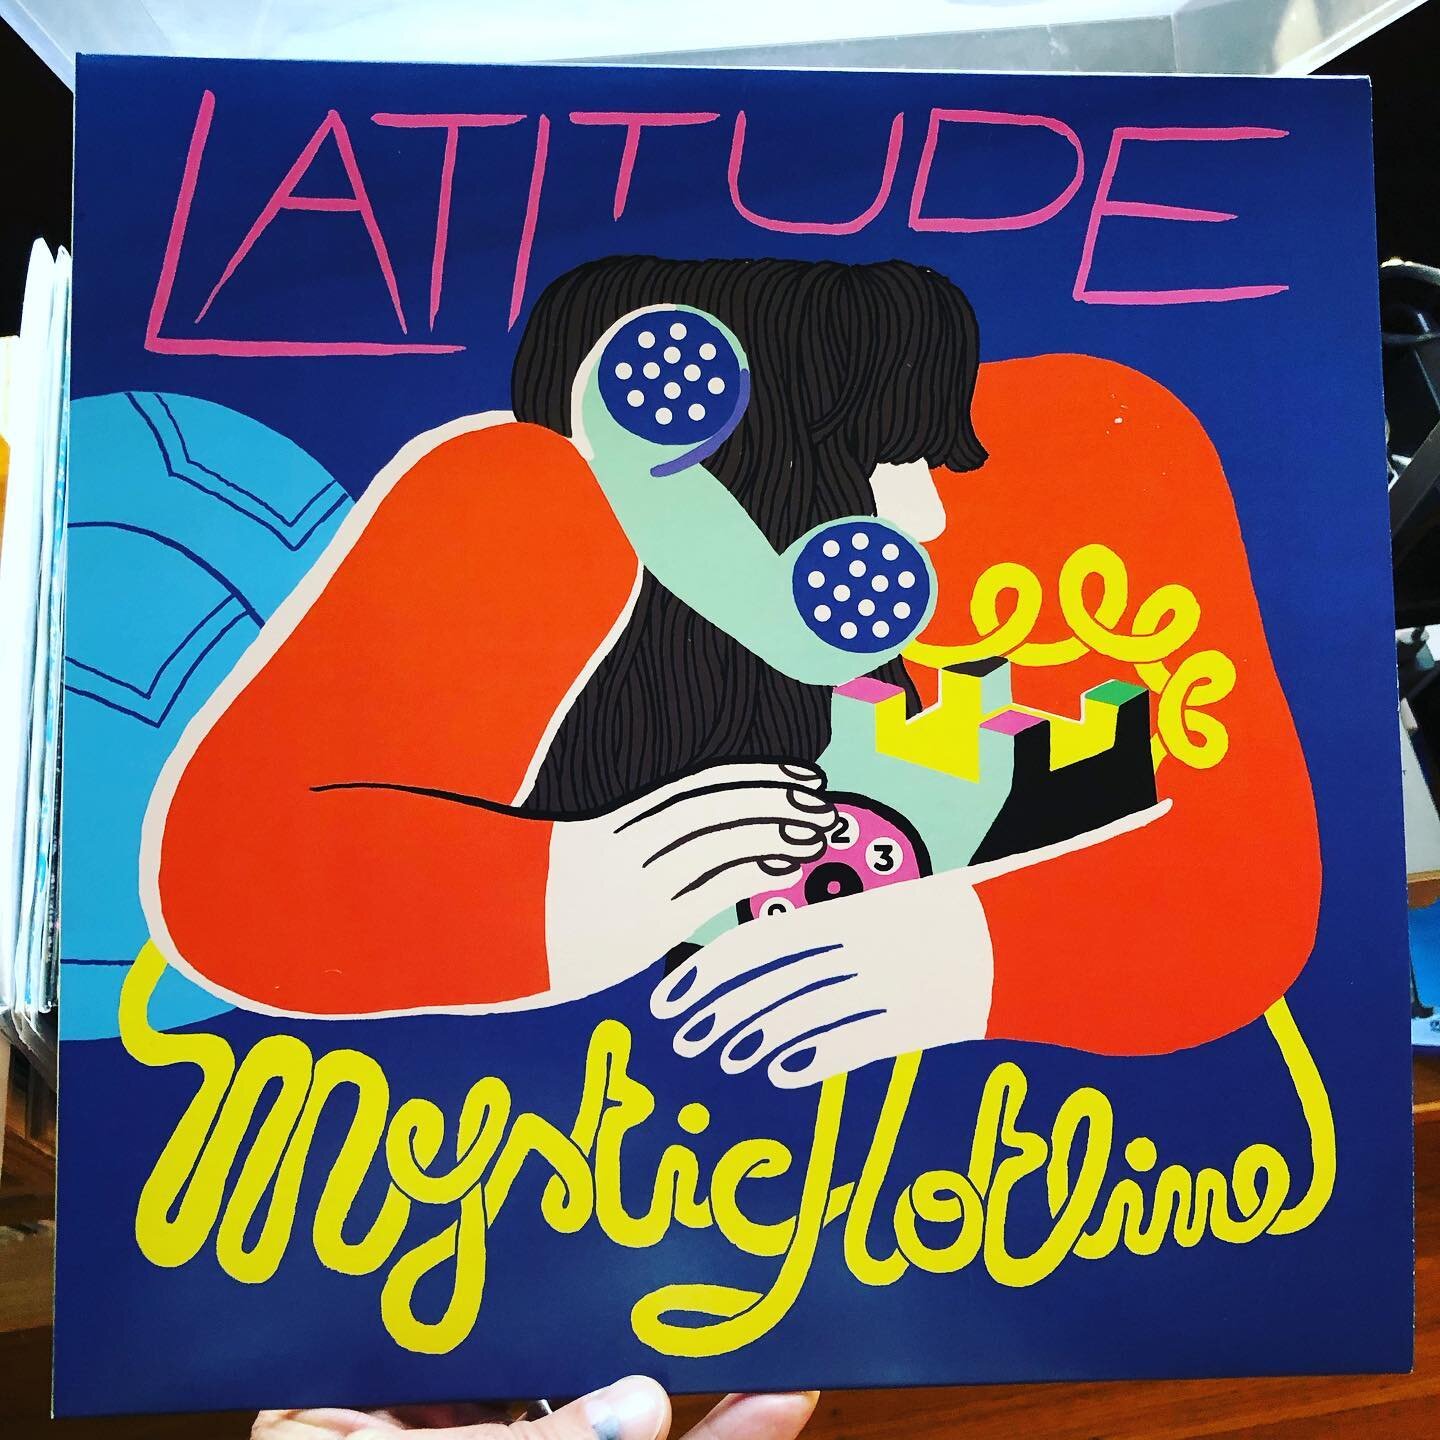 Some (semi) recent work: 
Latitude - &lsquo;Mystic Hotline&rsquo; LP
Out on Emotional Response Records. 
This was a fun session:)